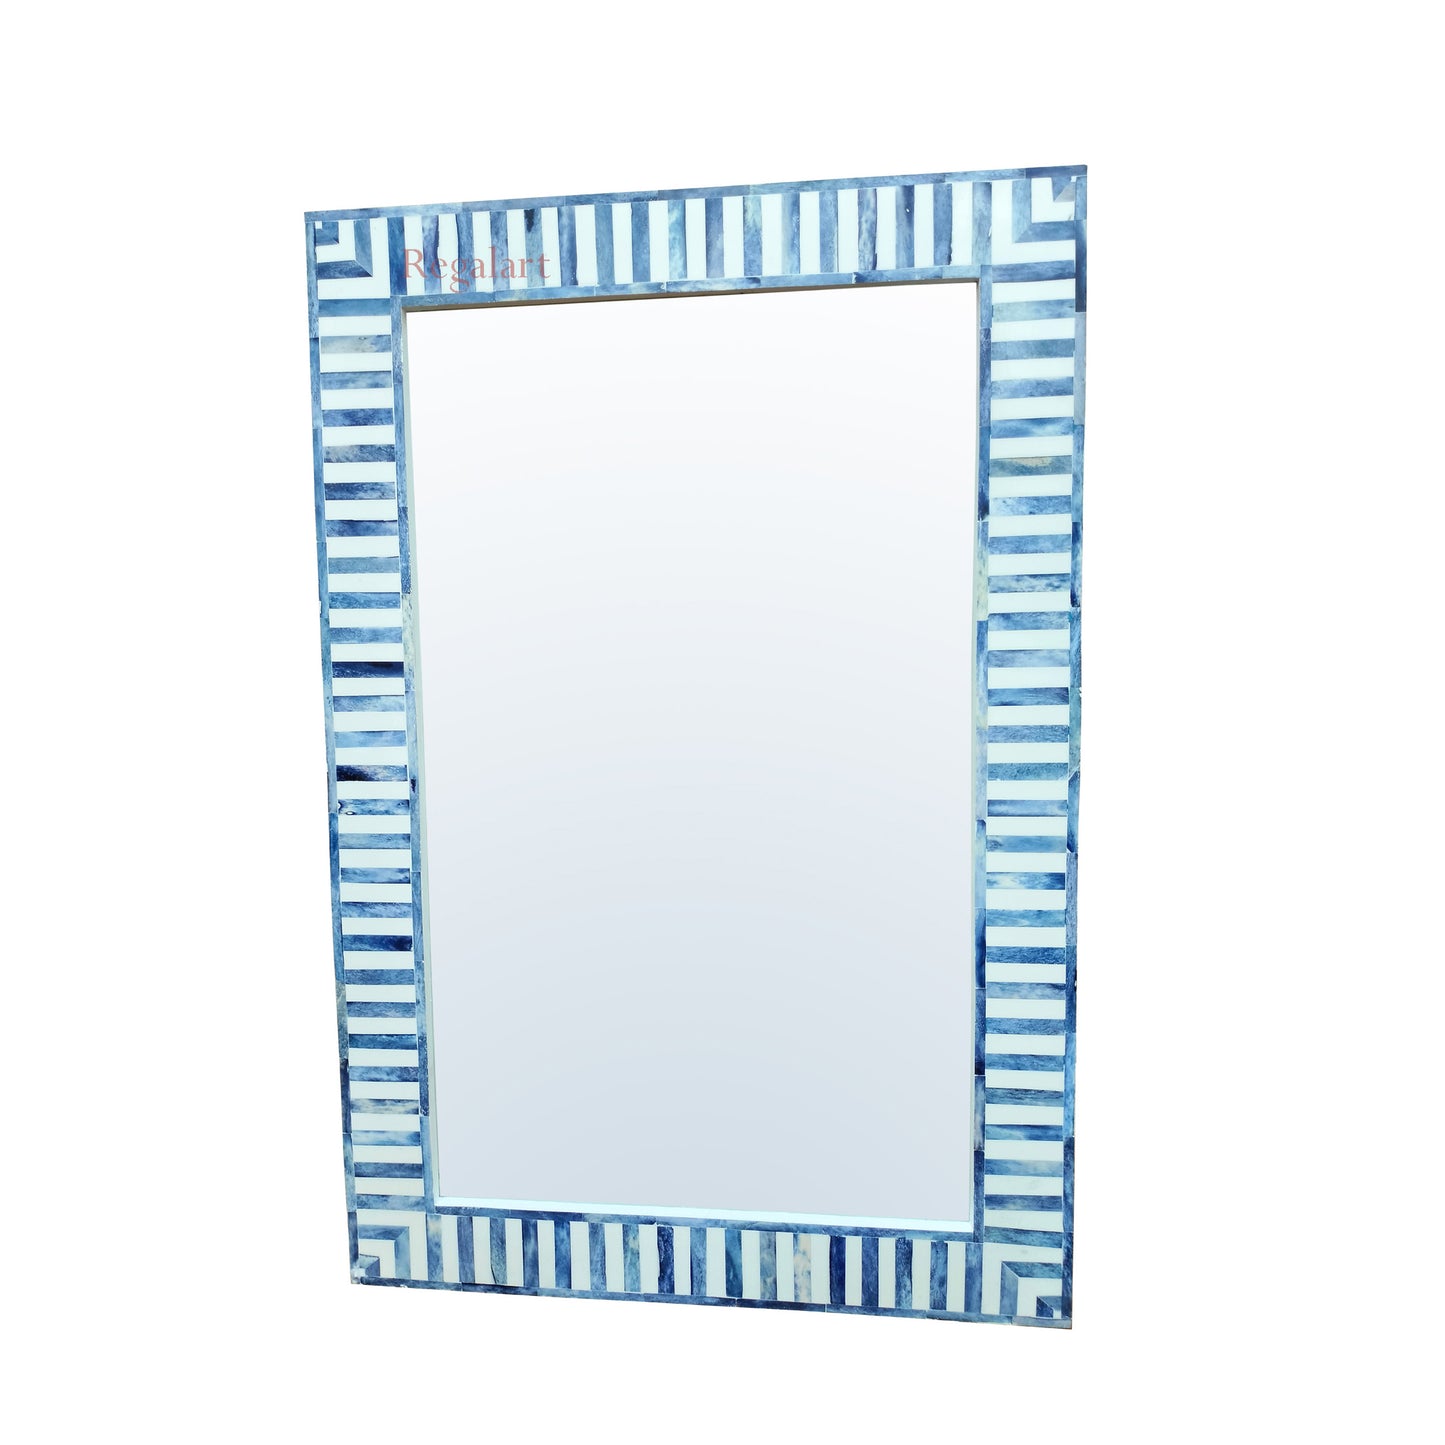 Blue Bone Inlay Unique Pattern Mirror Frame Home Decor Handcrafted Wall Decor